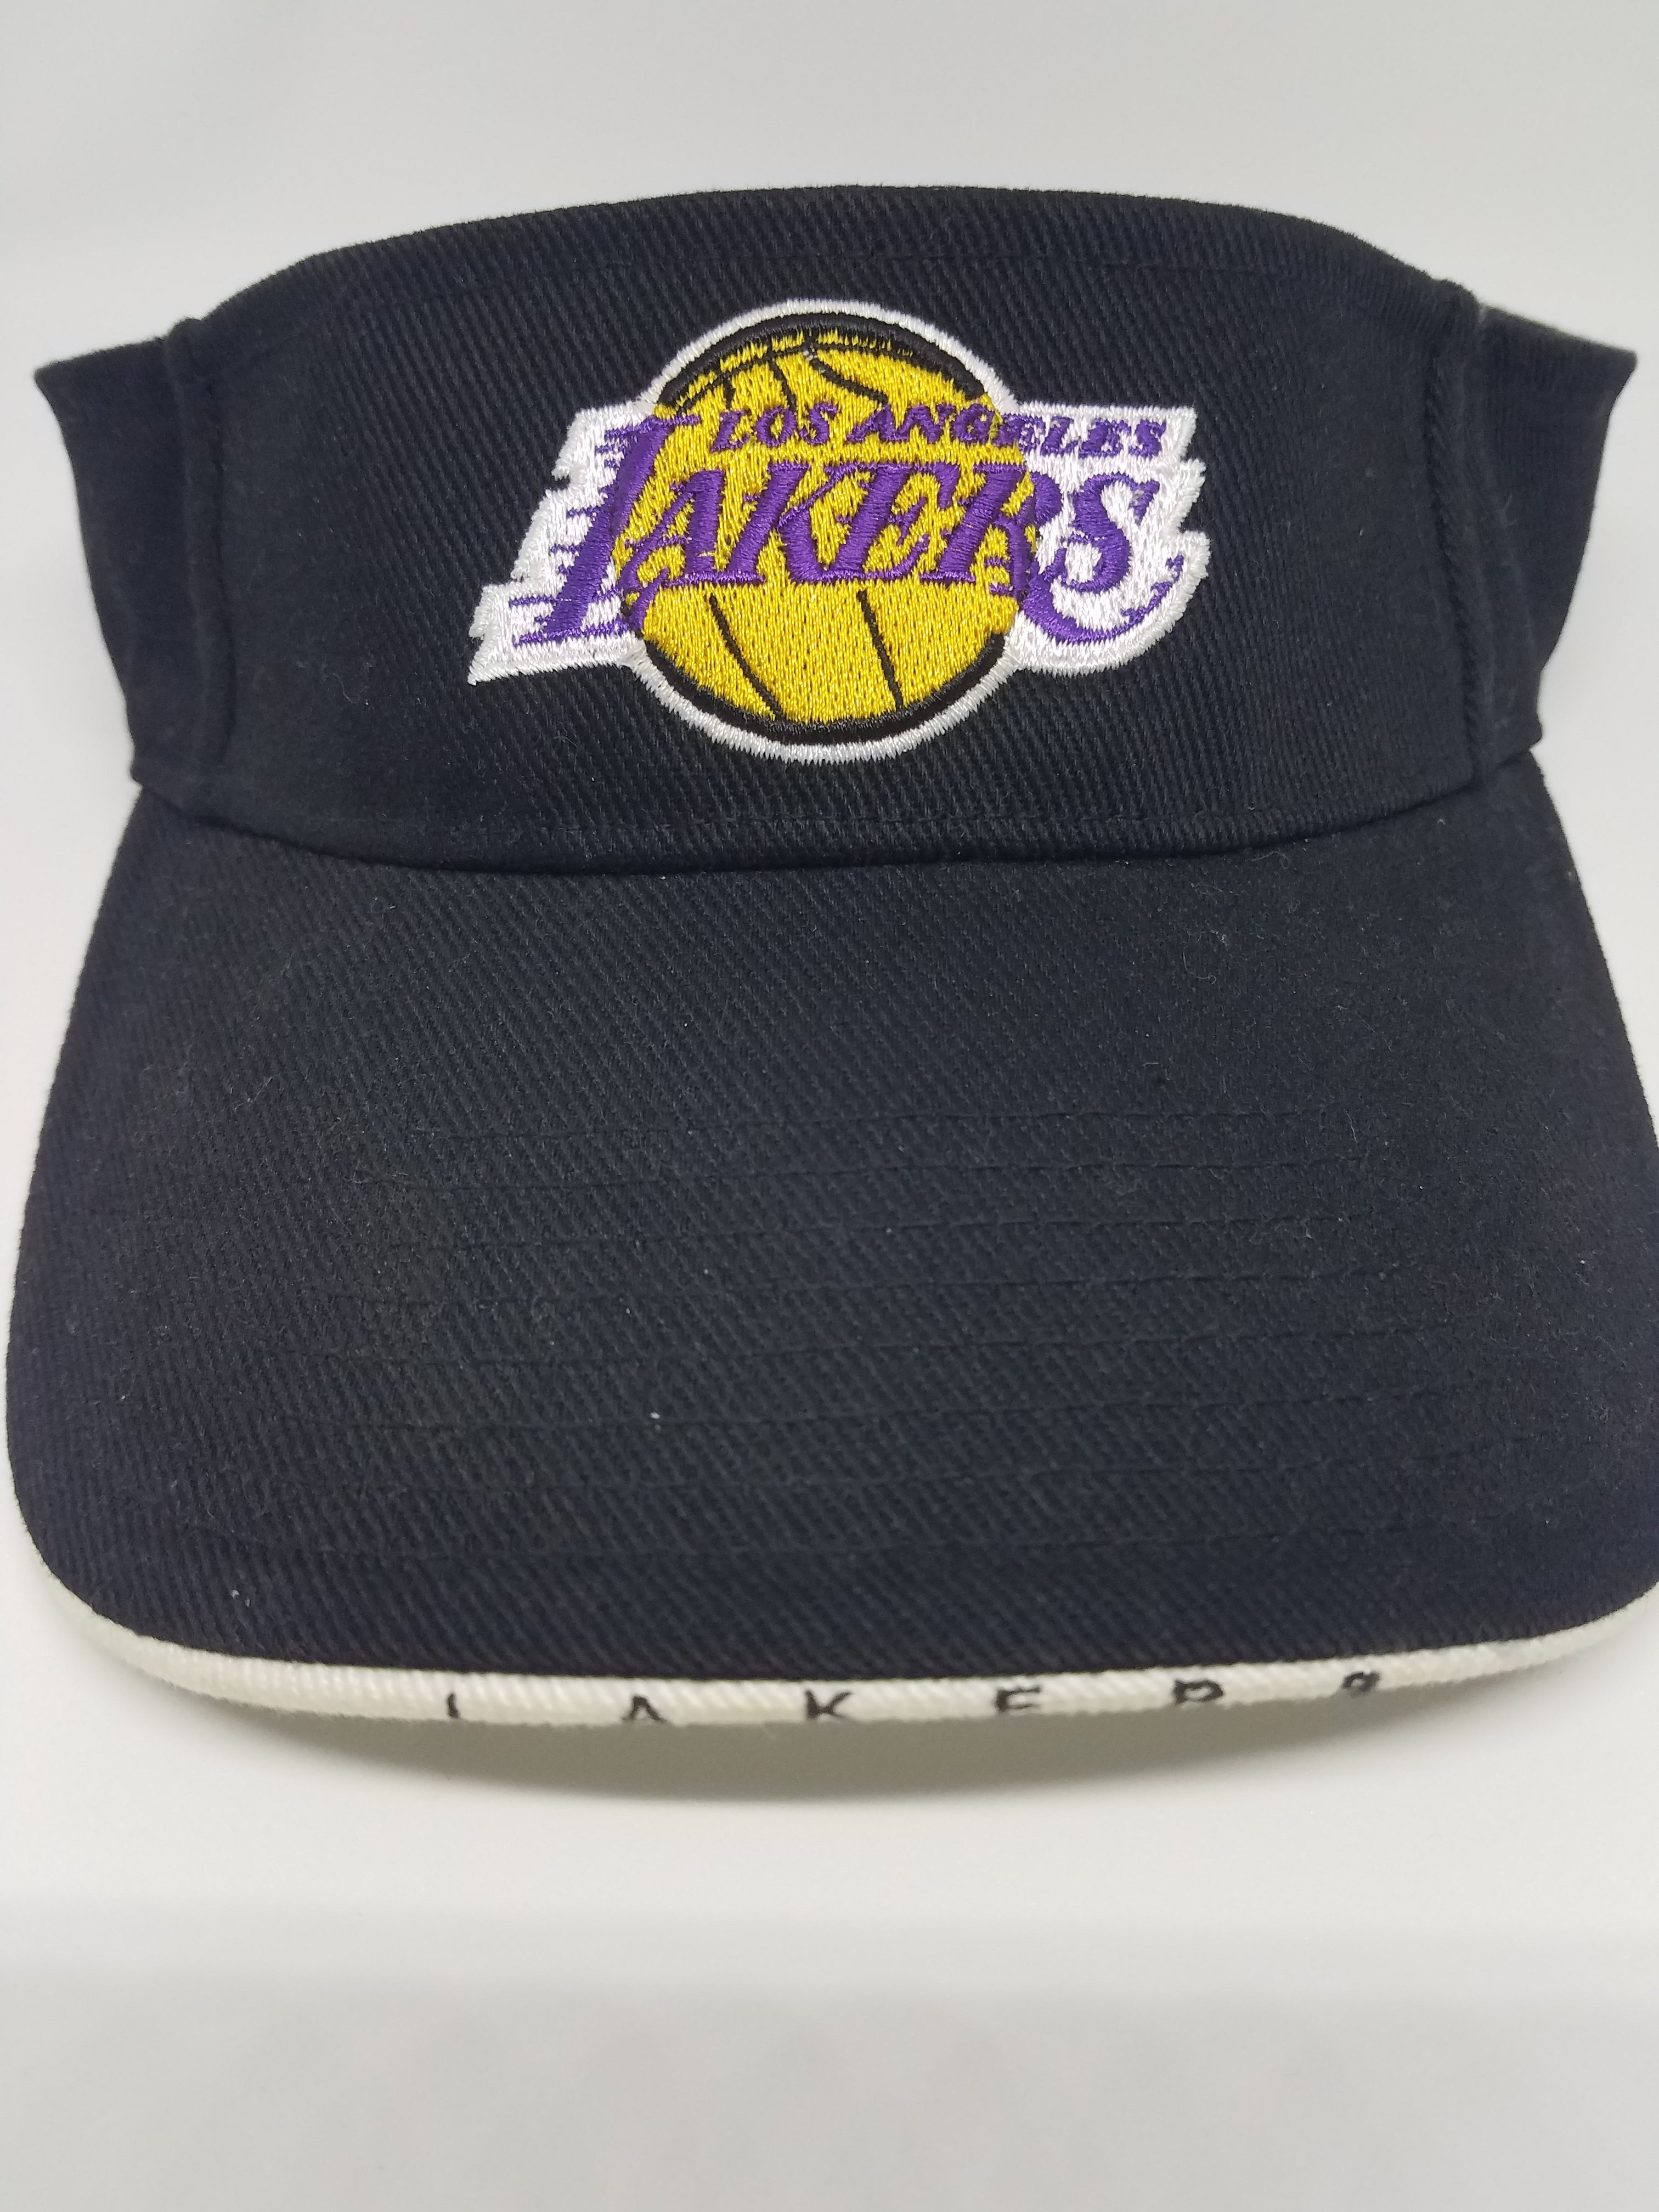 NBA Los Angeles Lakers Clean Up Hat